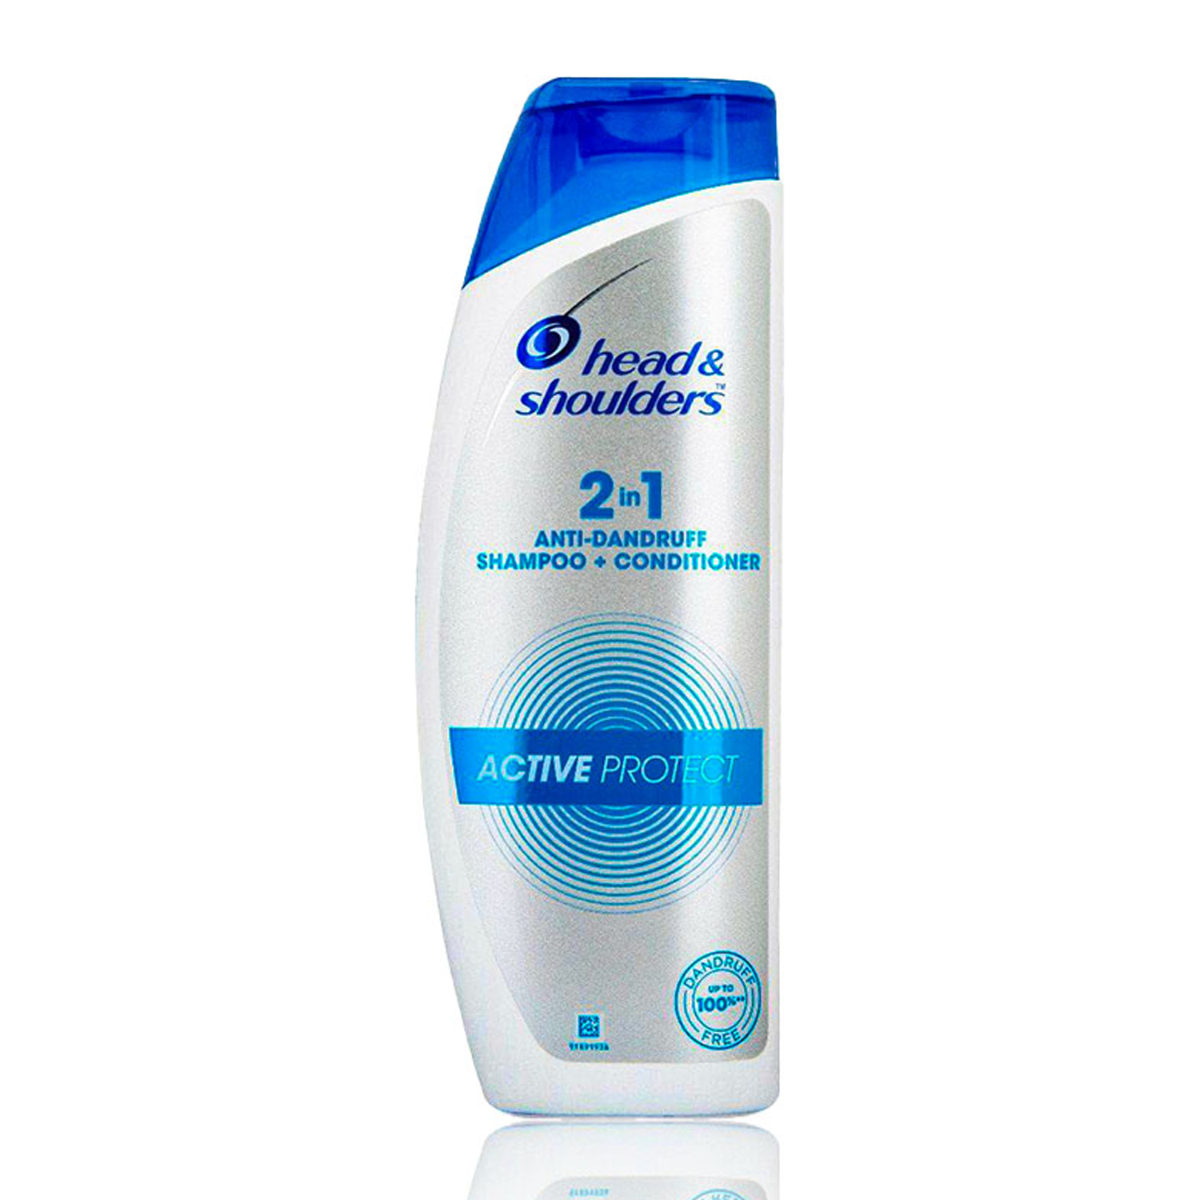 Head & Shoulders 2-in-1 Active Protect Shampoo, 340ml